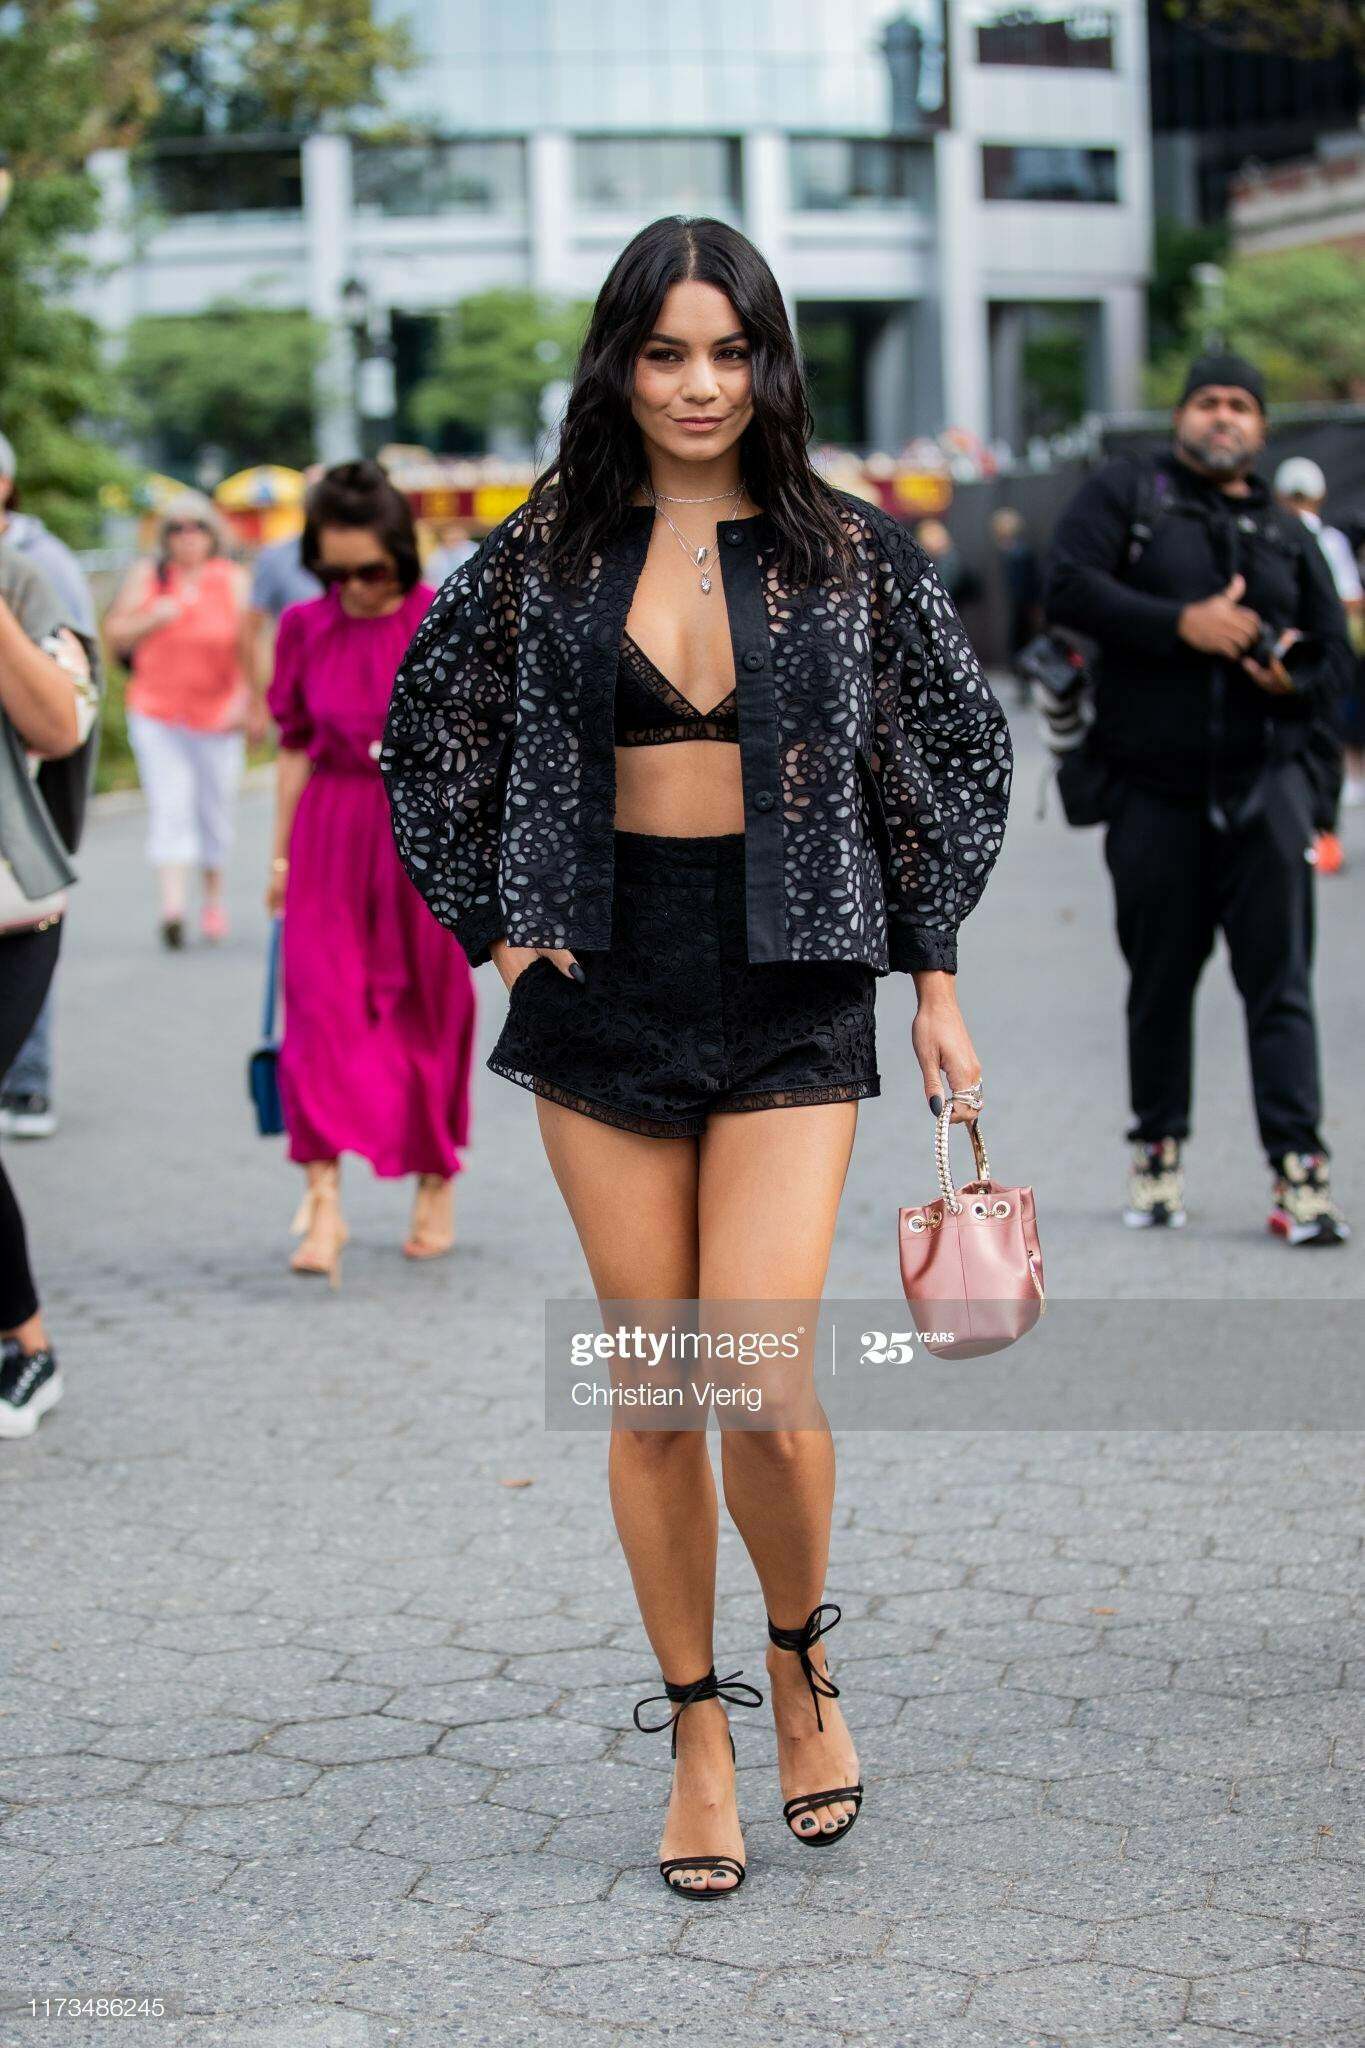 In an alternate (better) universe, Vanessa Hudgens earns her wealth as a cock-pleaser for the uber rich.